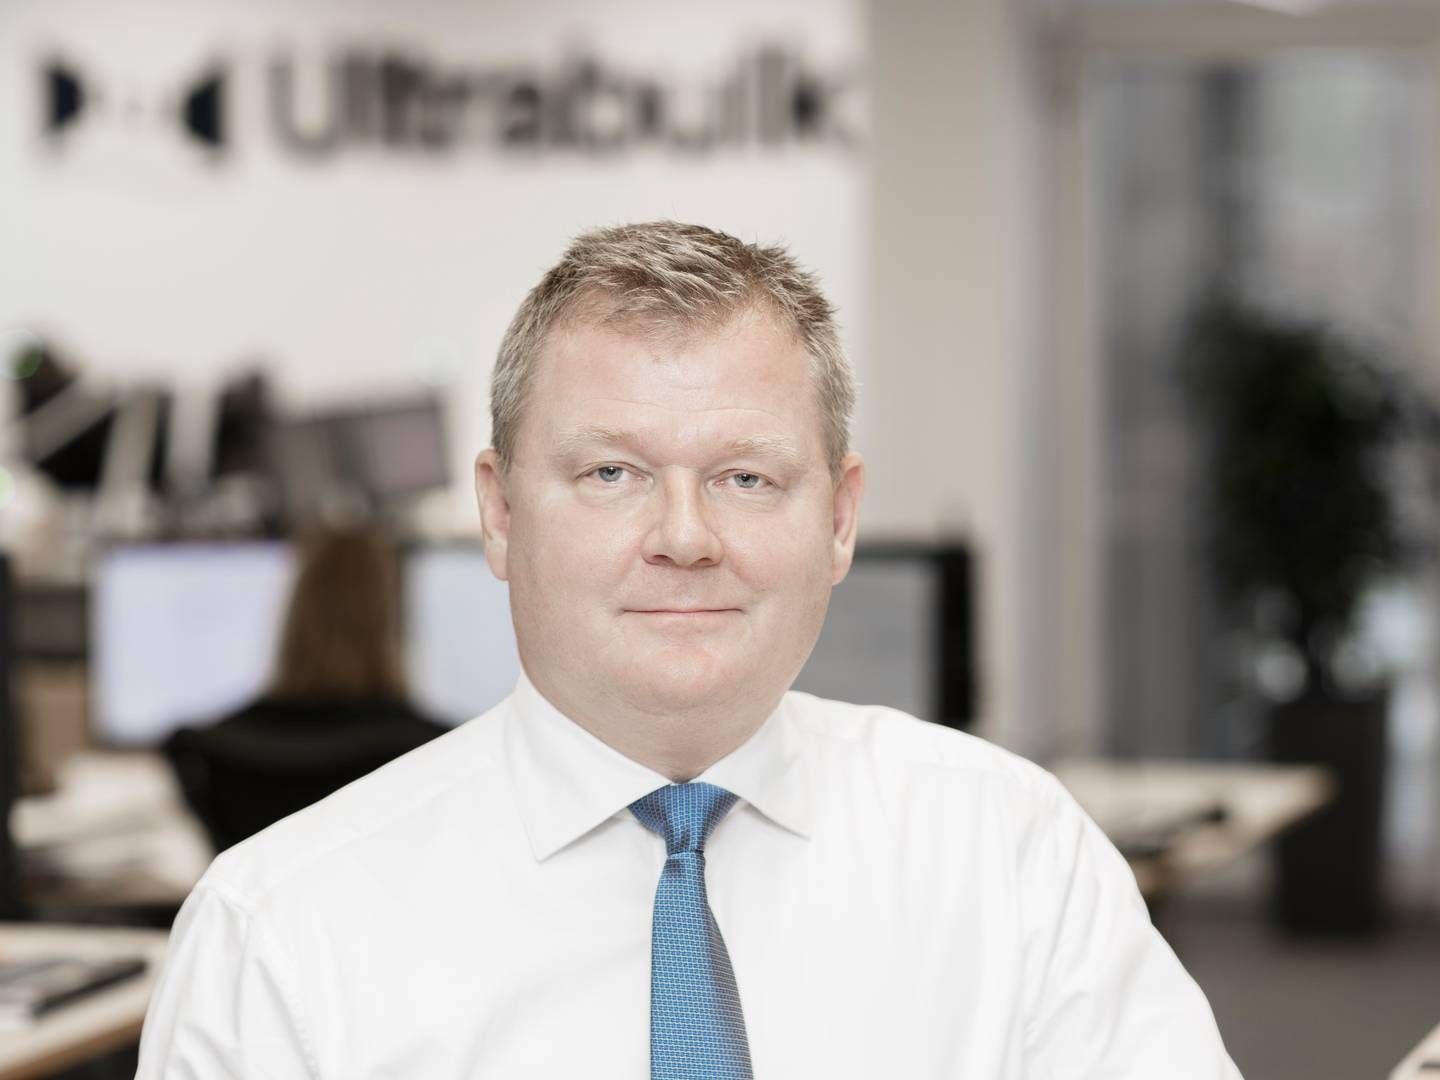 The dry bulk earnings upswing is easing off, but Ultrabulk is optimistic following China's reopening, says CEO Hans-Christian Olesen | Foto: Ultrabulk